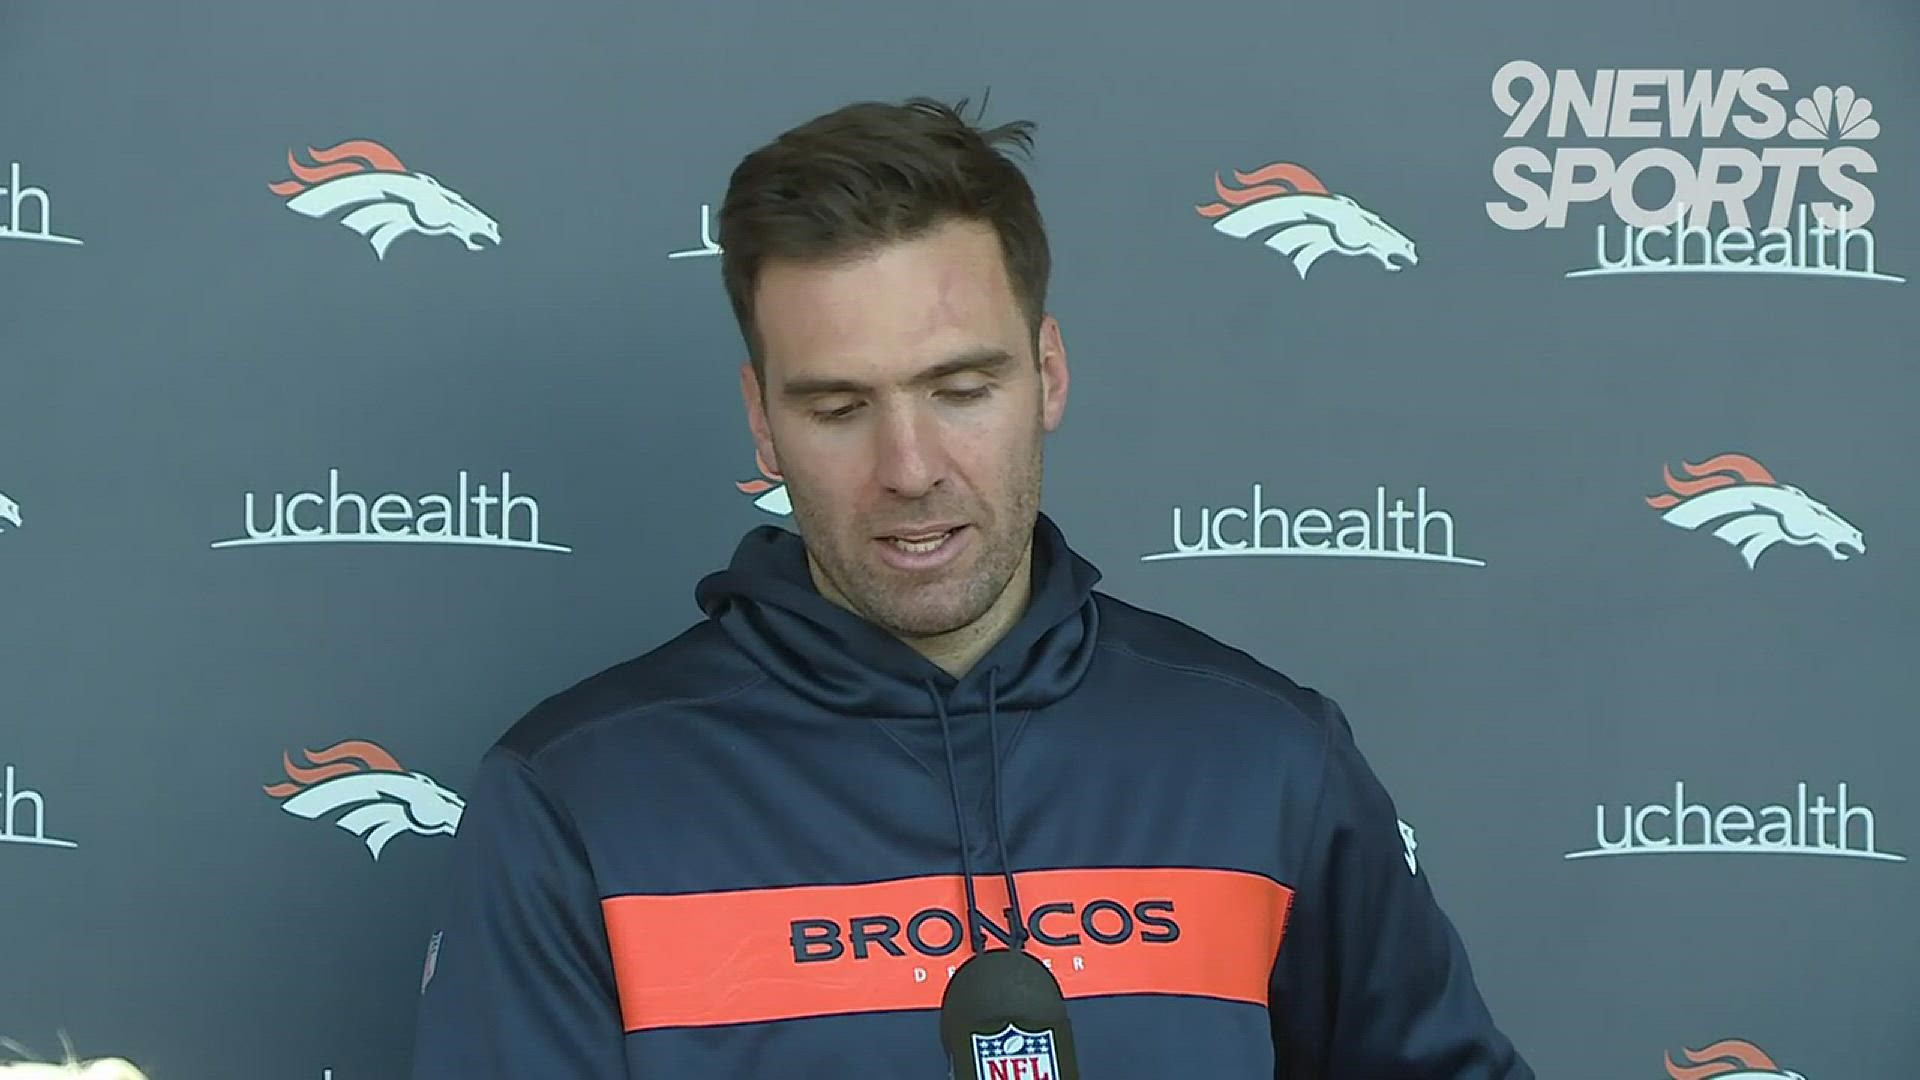 Flacco believes his time better spent learning new Broncos offense, and becoming the best he can be.